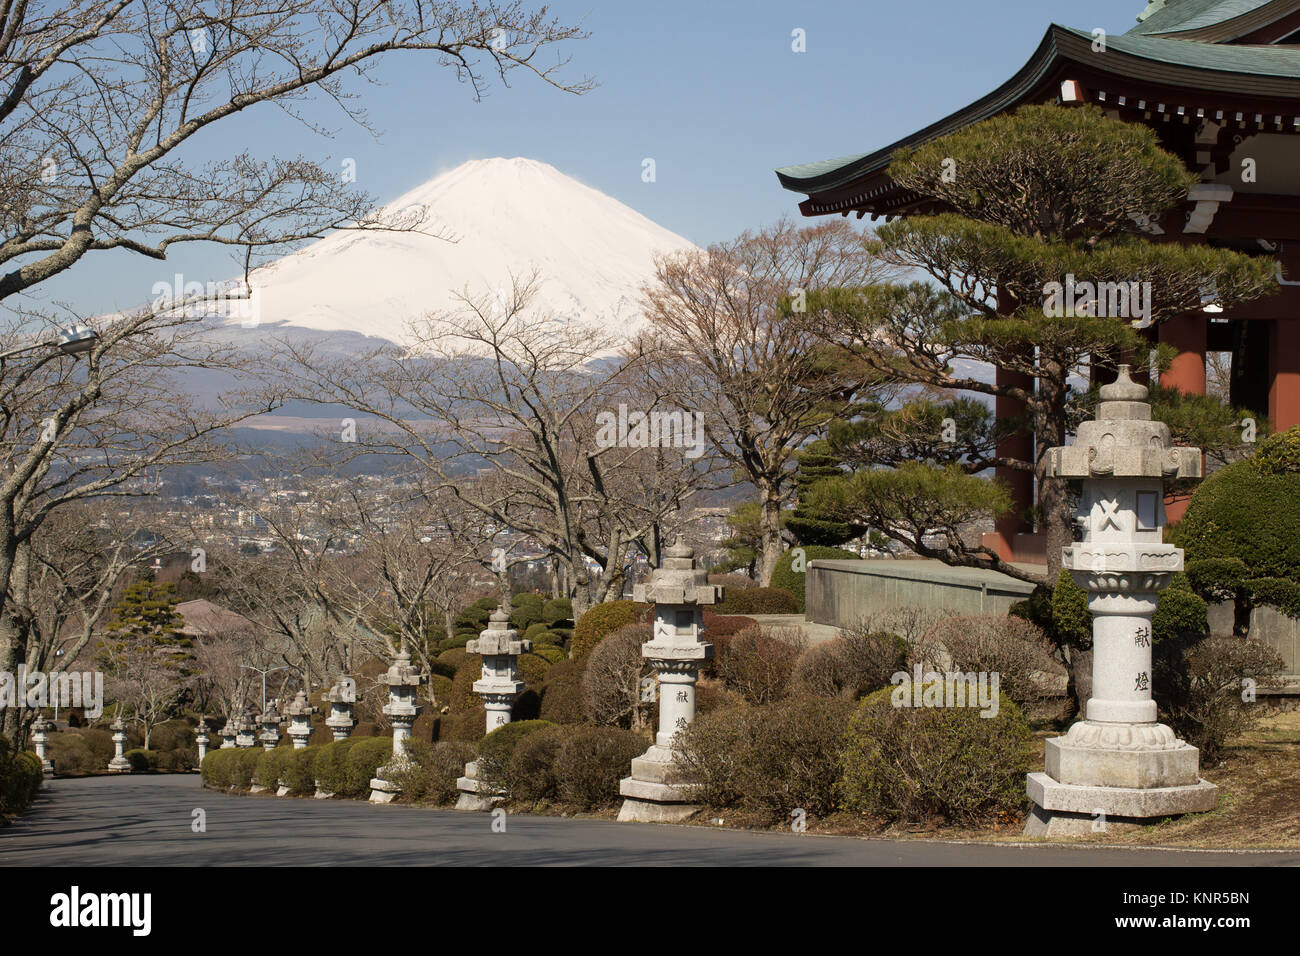 The Buddhist Temple situated in a peace garden on the outskirts of Gotenba which offers views of Mt Fuji Stock Photo